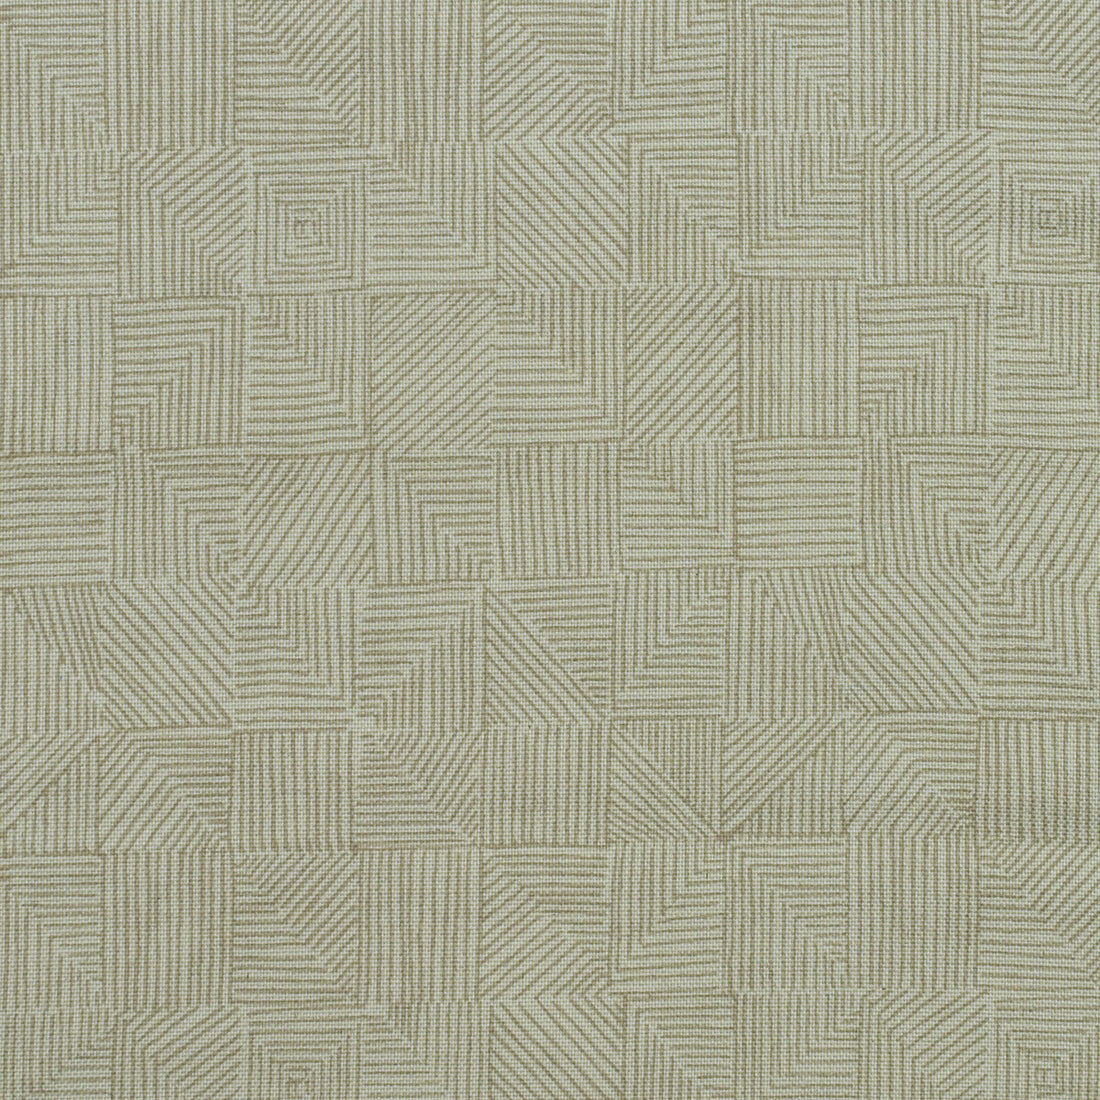 Bark fabric in twig color - pattern AM100389.16.0 - by Kravet Couture in the Andrew Martin Woodland By Sophie Paterson collection